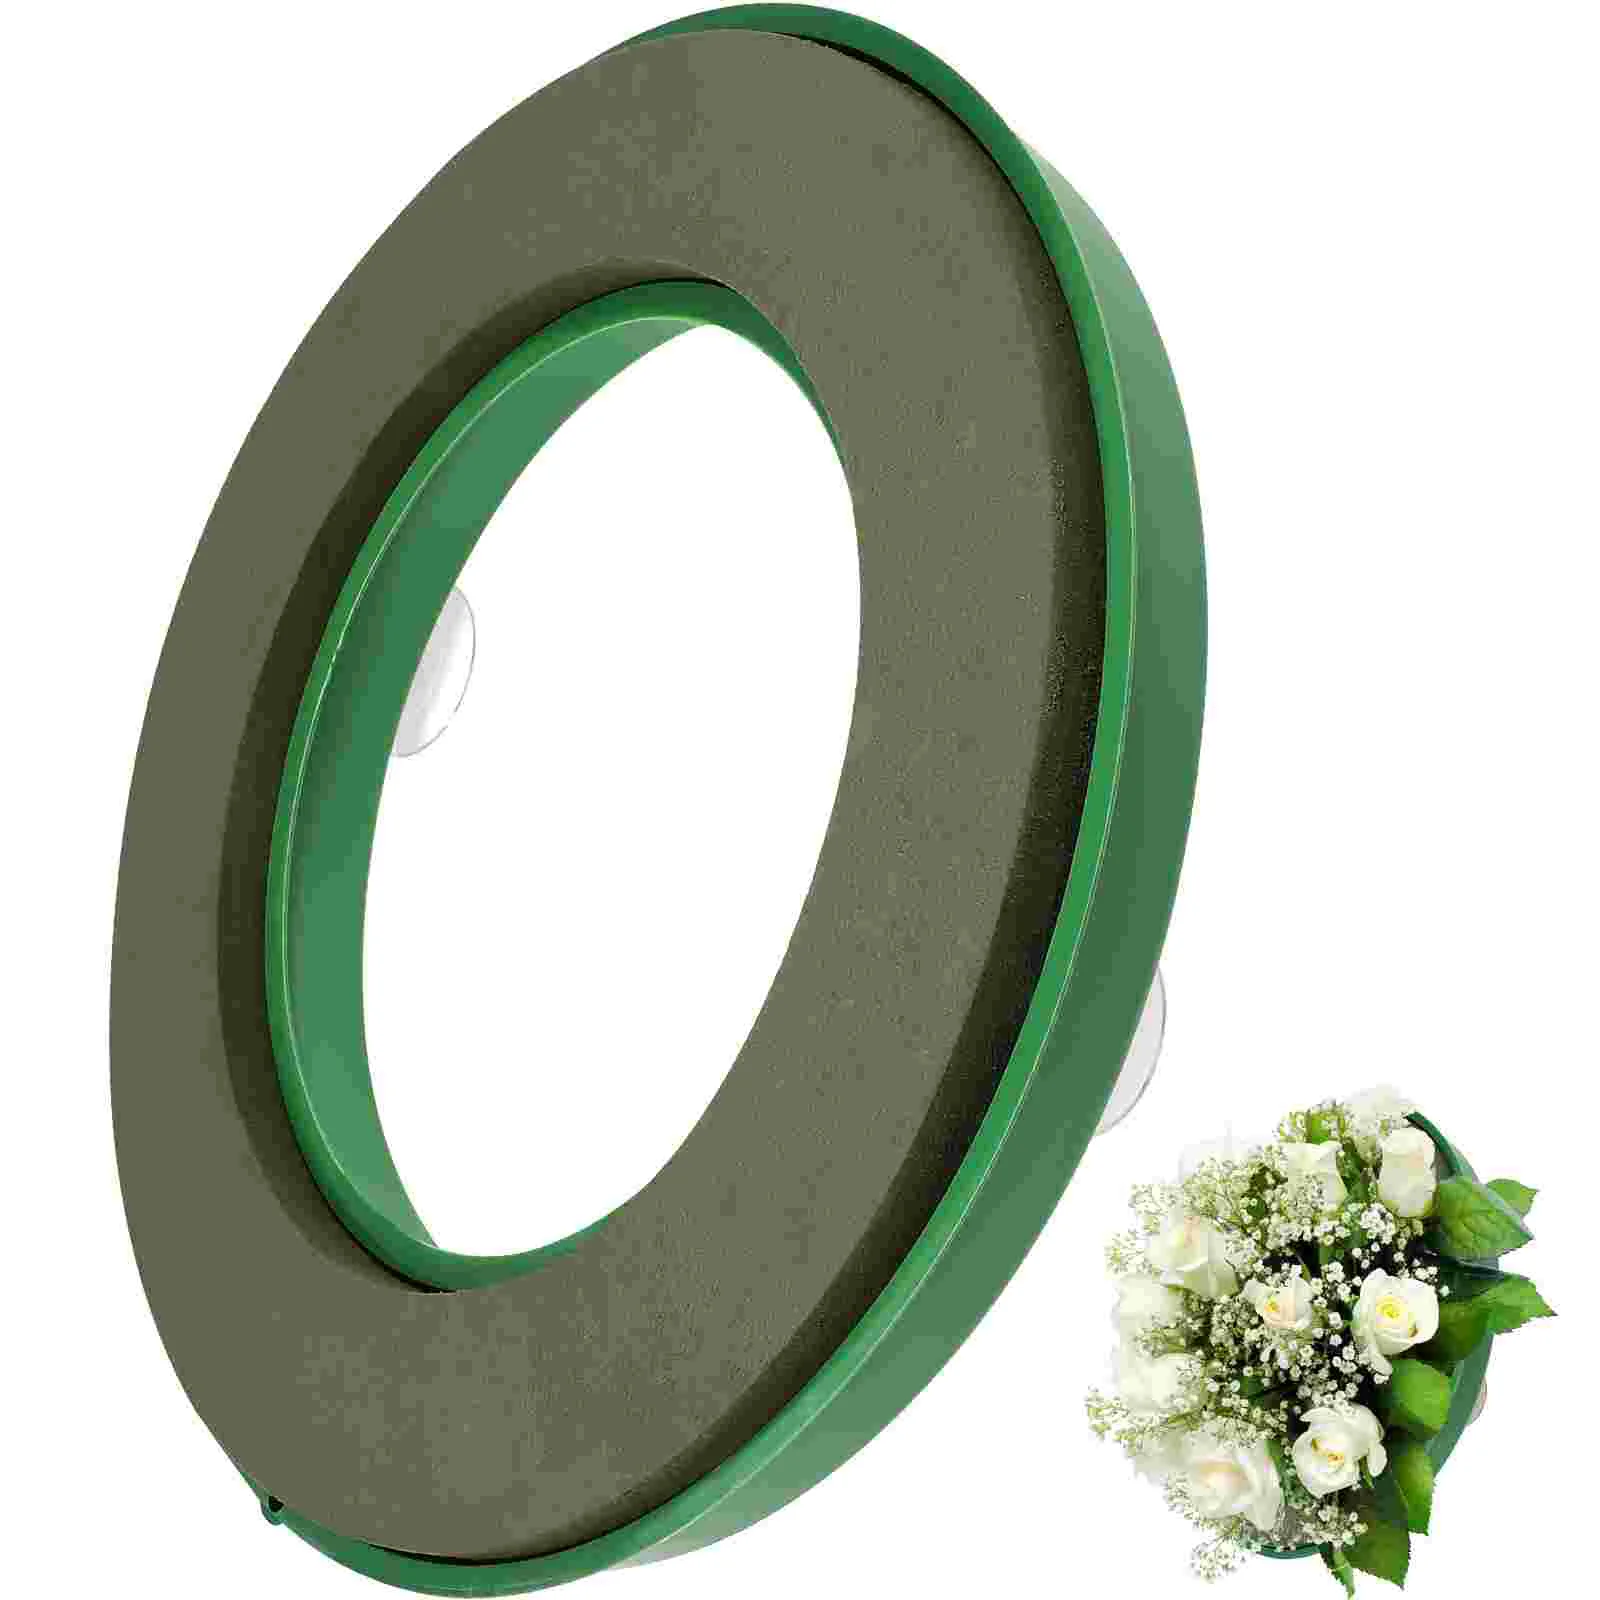 

Garland Form Wreath Tool Foam Circles Ring Sucker Base Flower Rings Floral Projects Craft